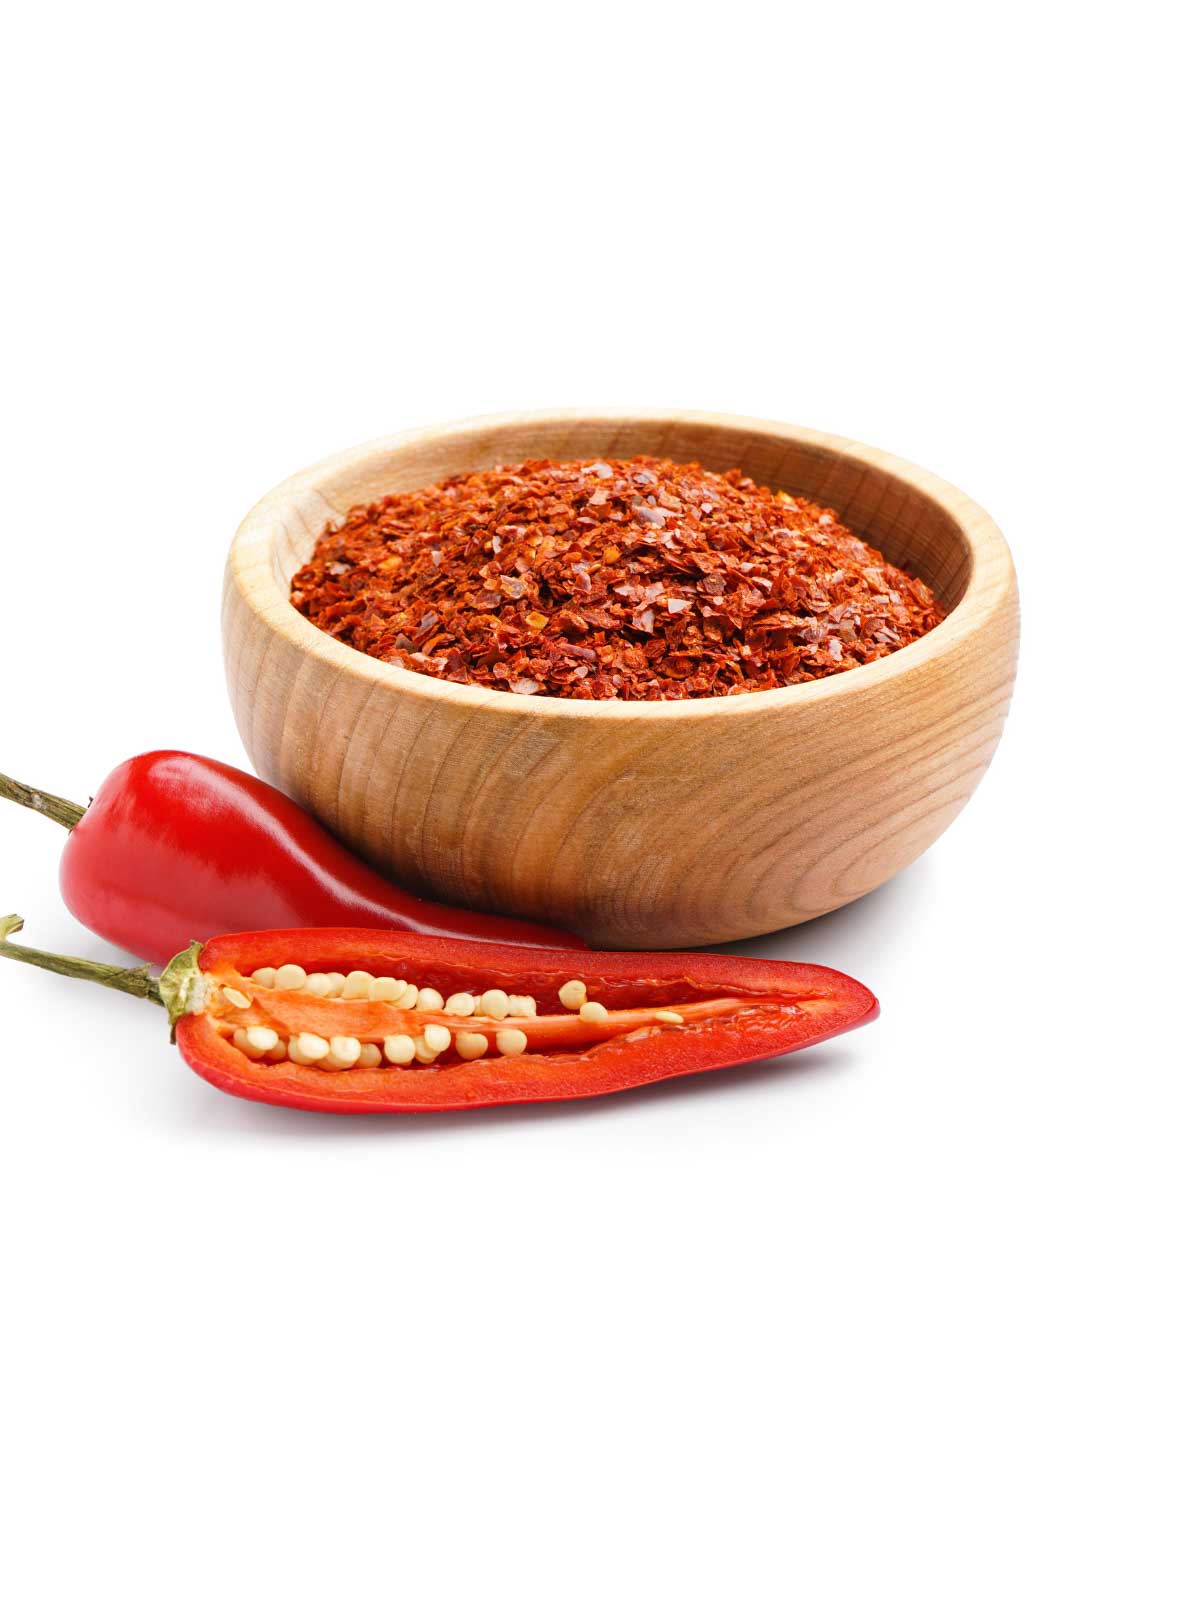 bowl of red pepper flakes with a red pepper sitting next to them